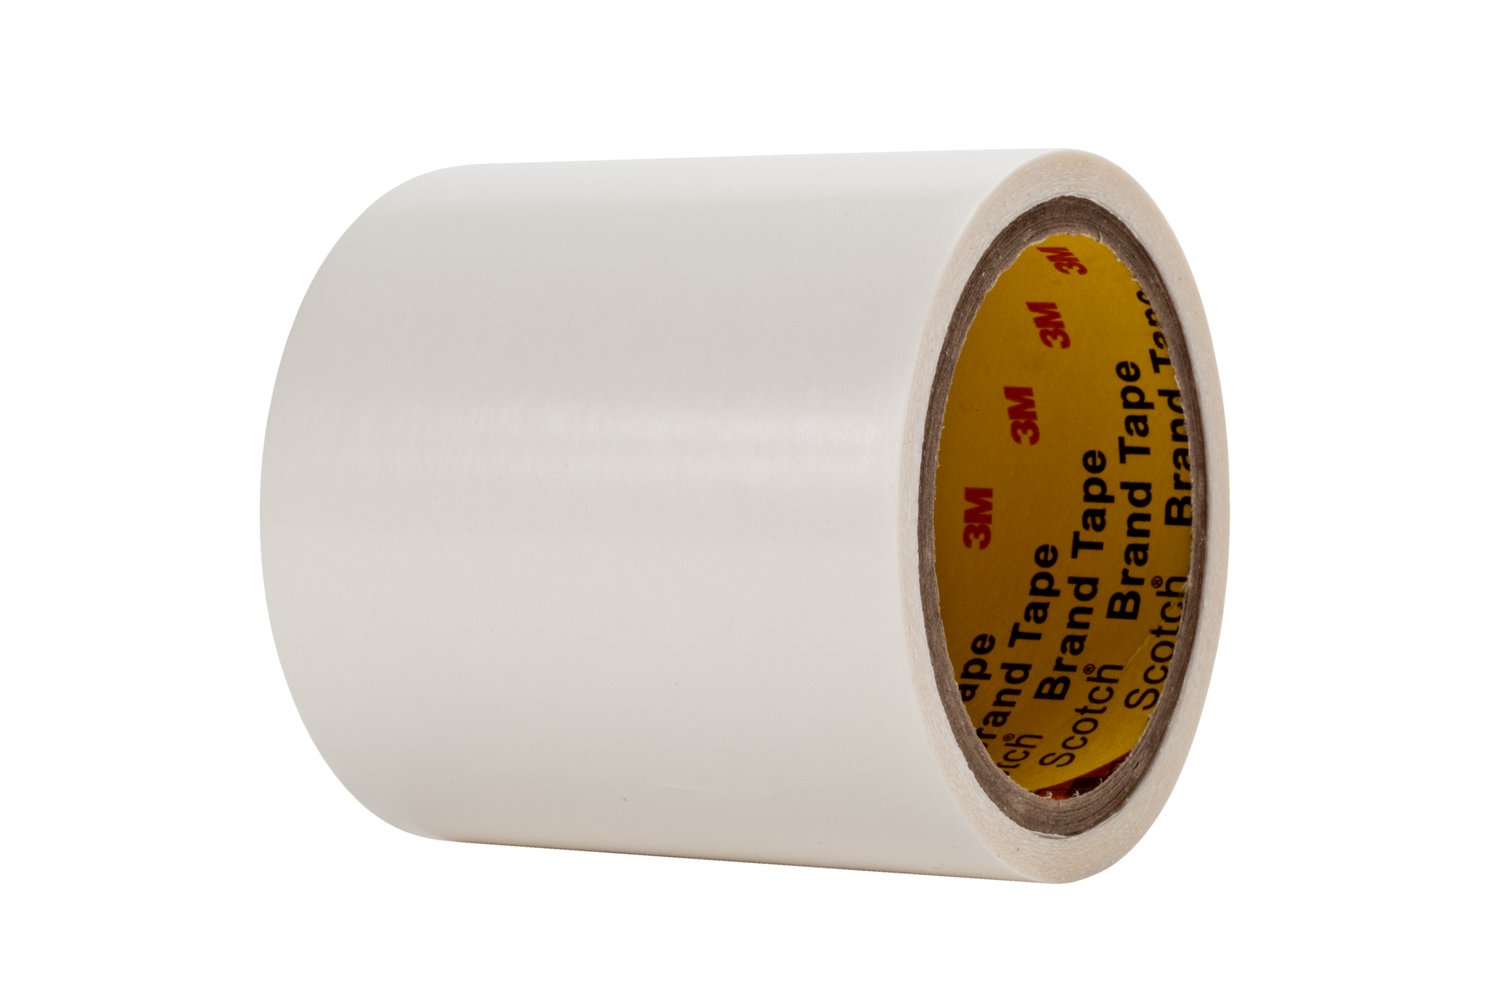 https://www.e-aircraftsupply.com/ItemImages/11/911884E_3mtm-double-coated-tape-55261.jpg